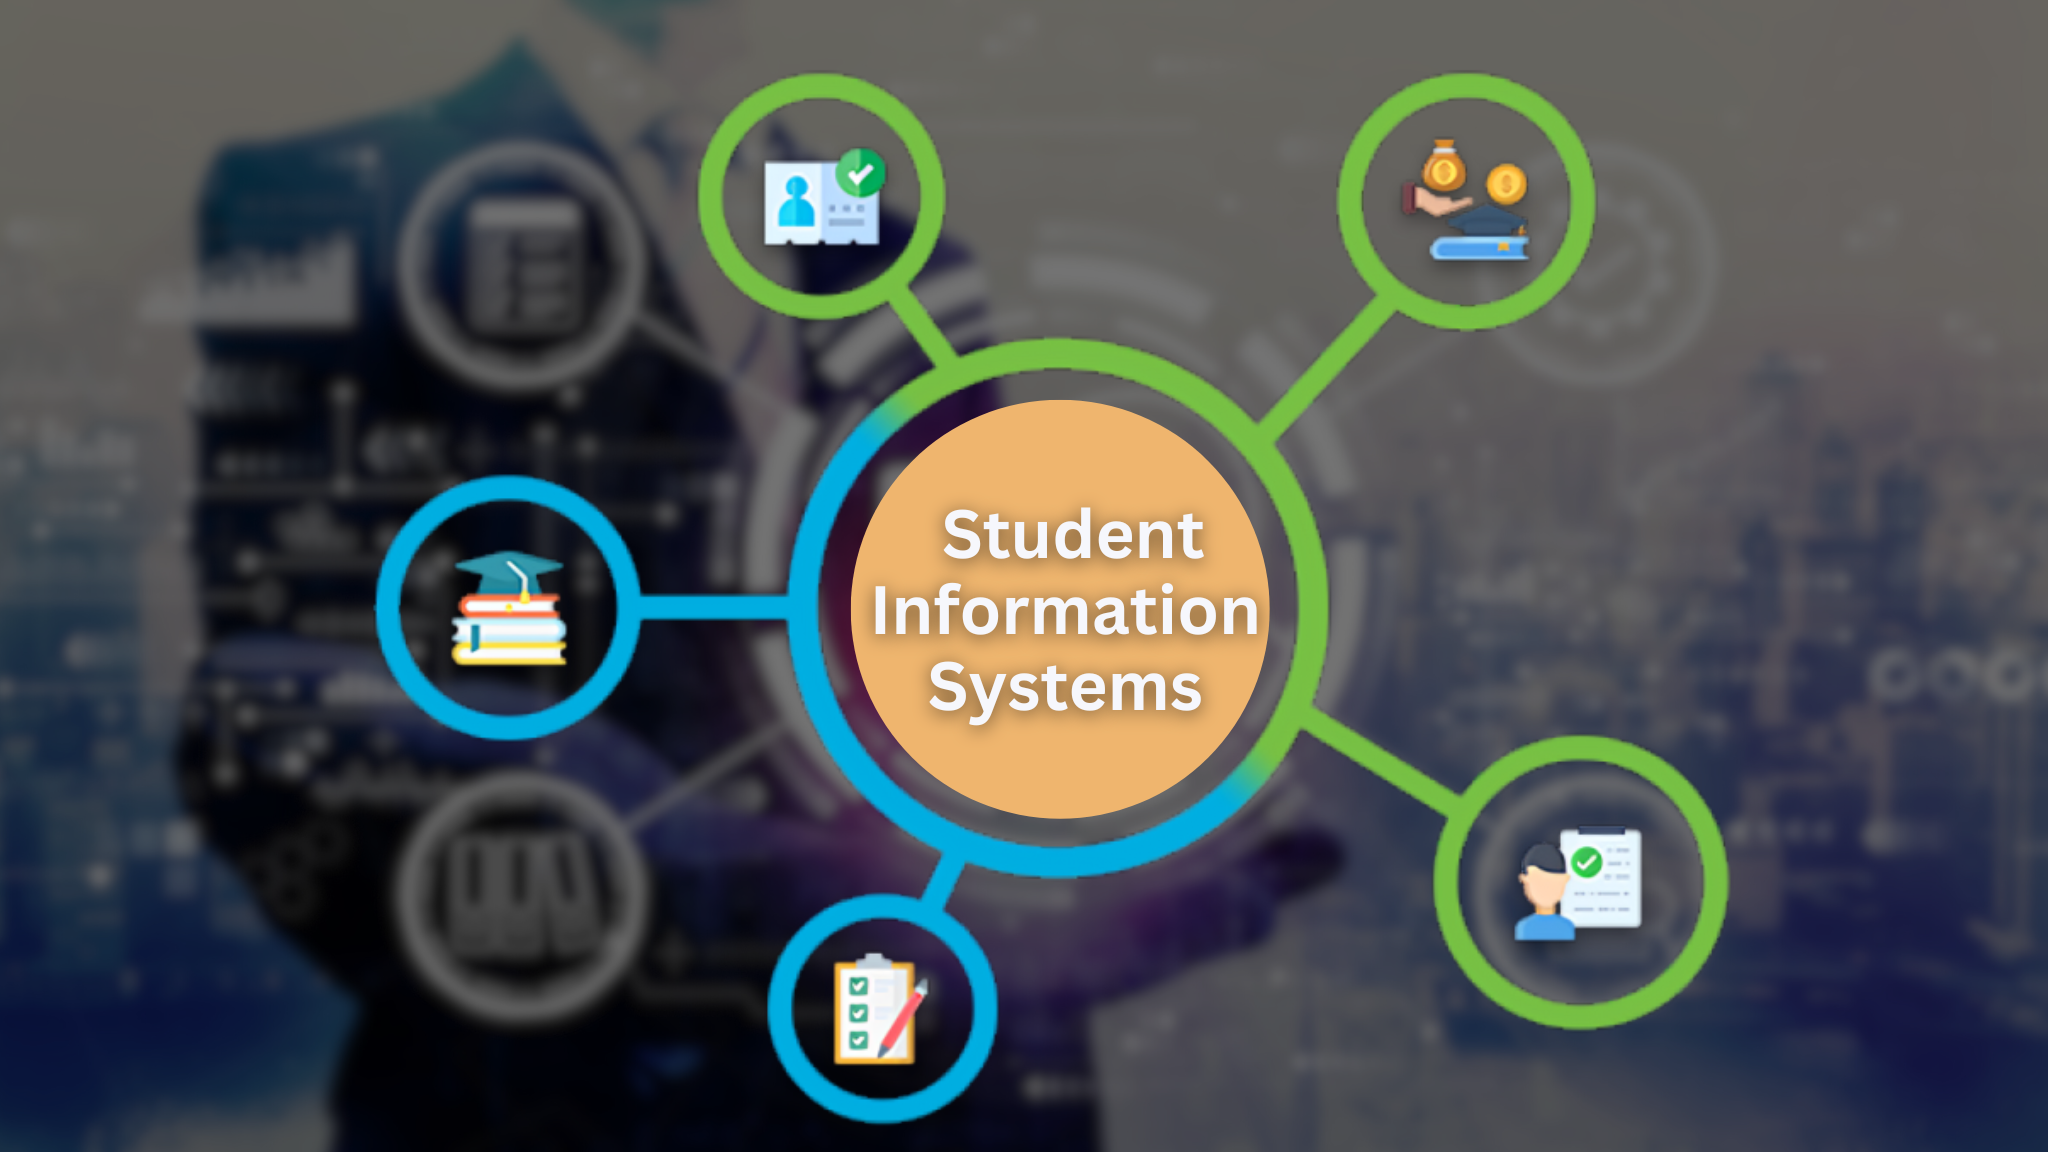 Integration with Student Information Systems